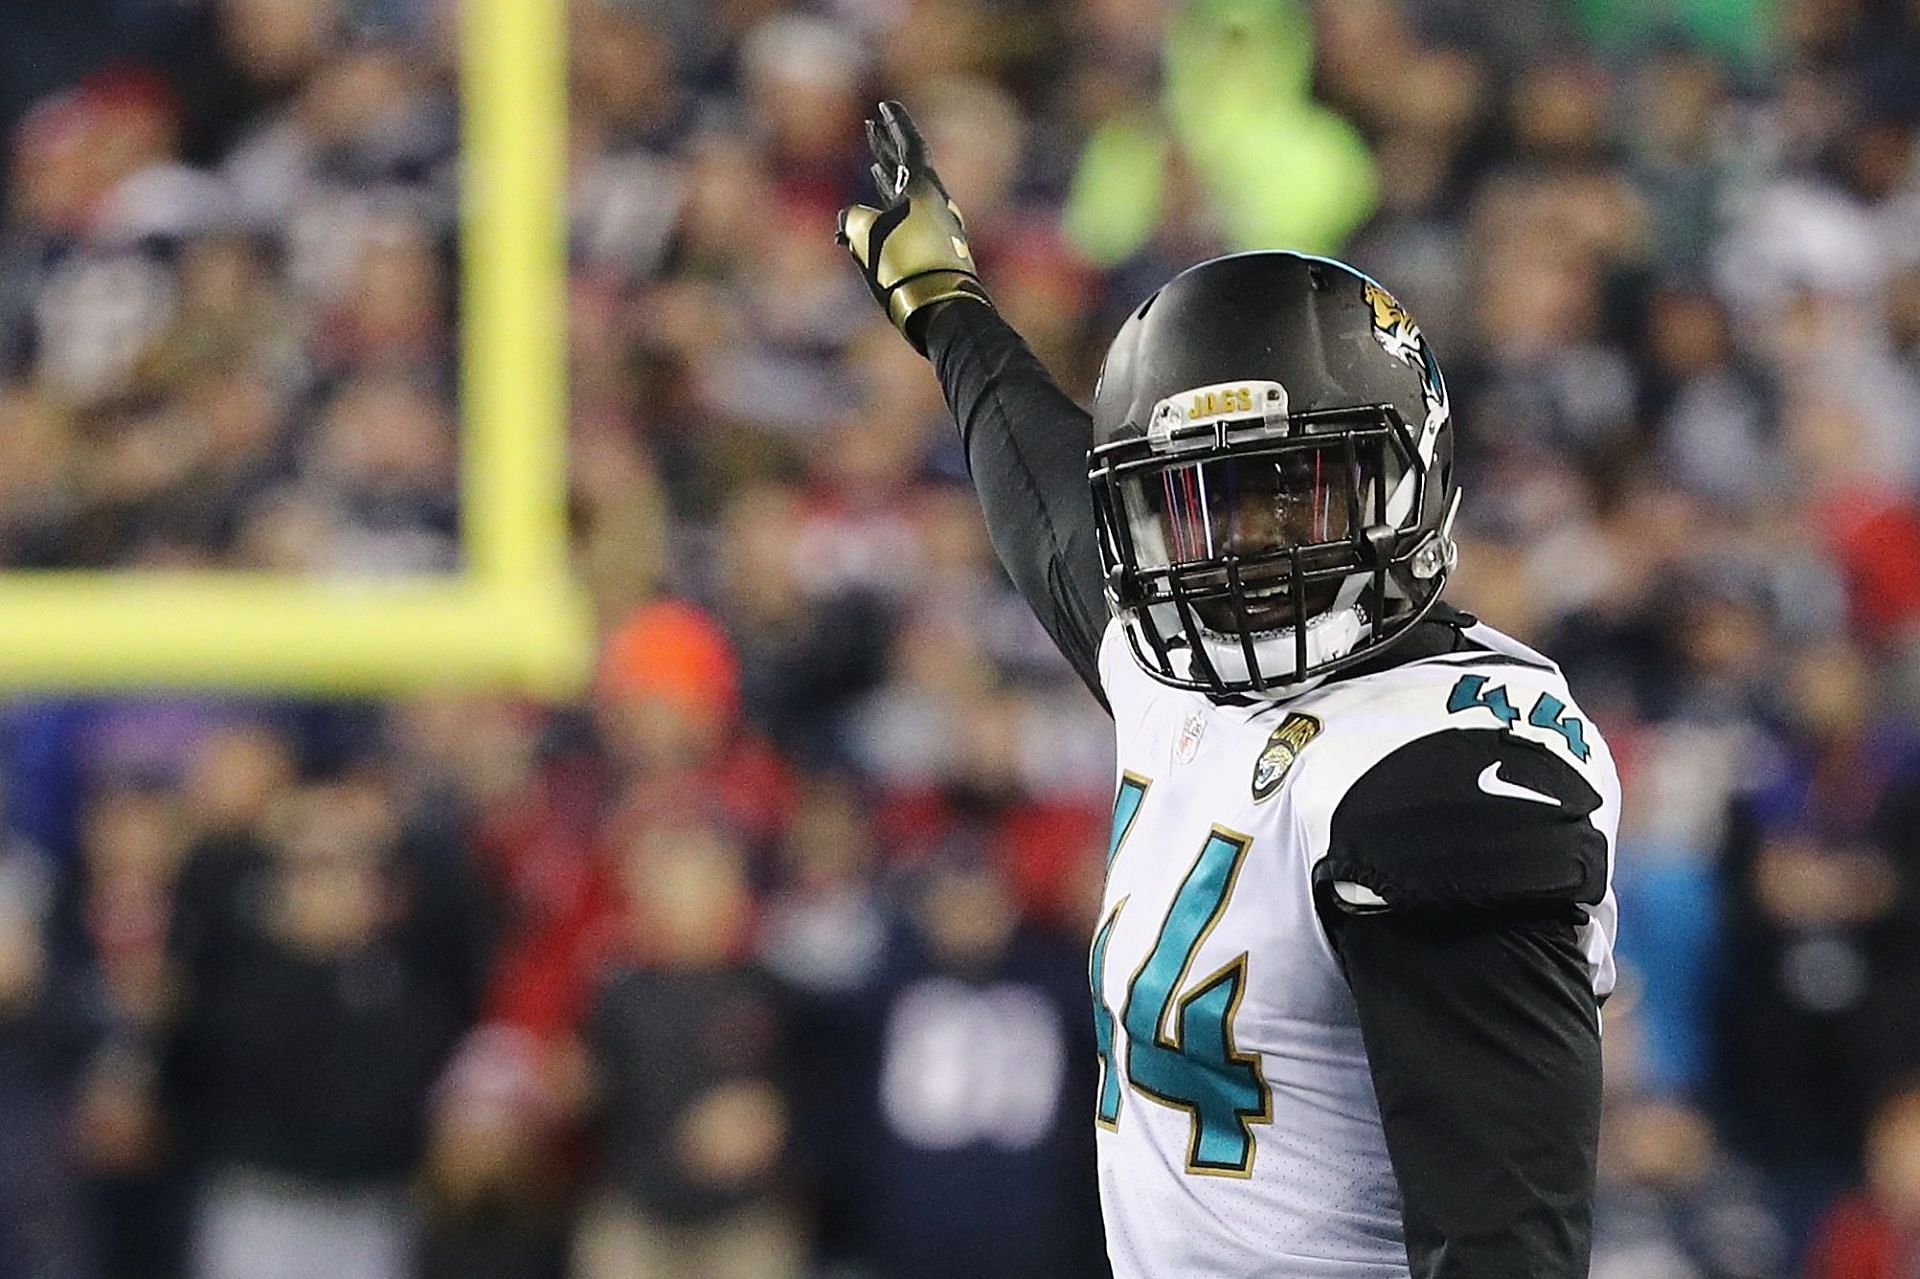 Myles Jack got his recovery but his fateful touchdown was erased (Photo: Getty)